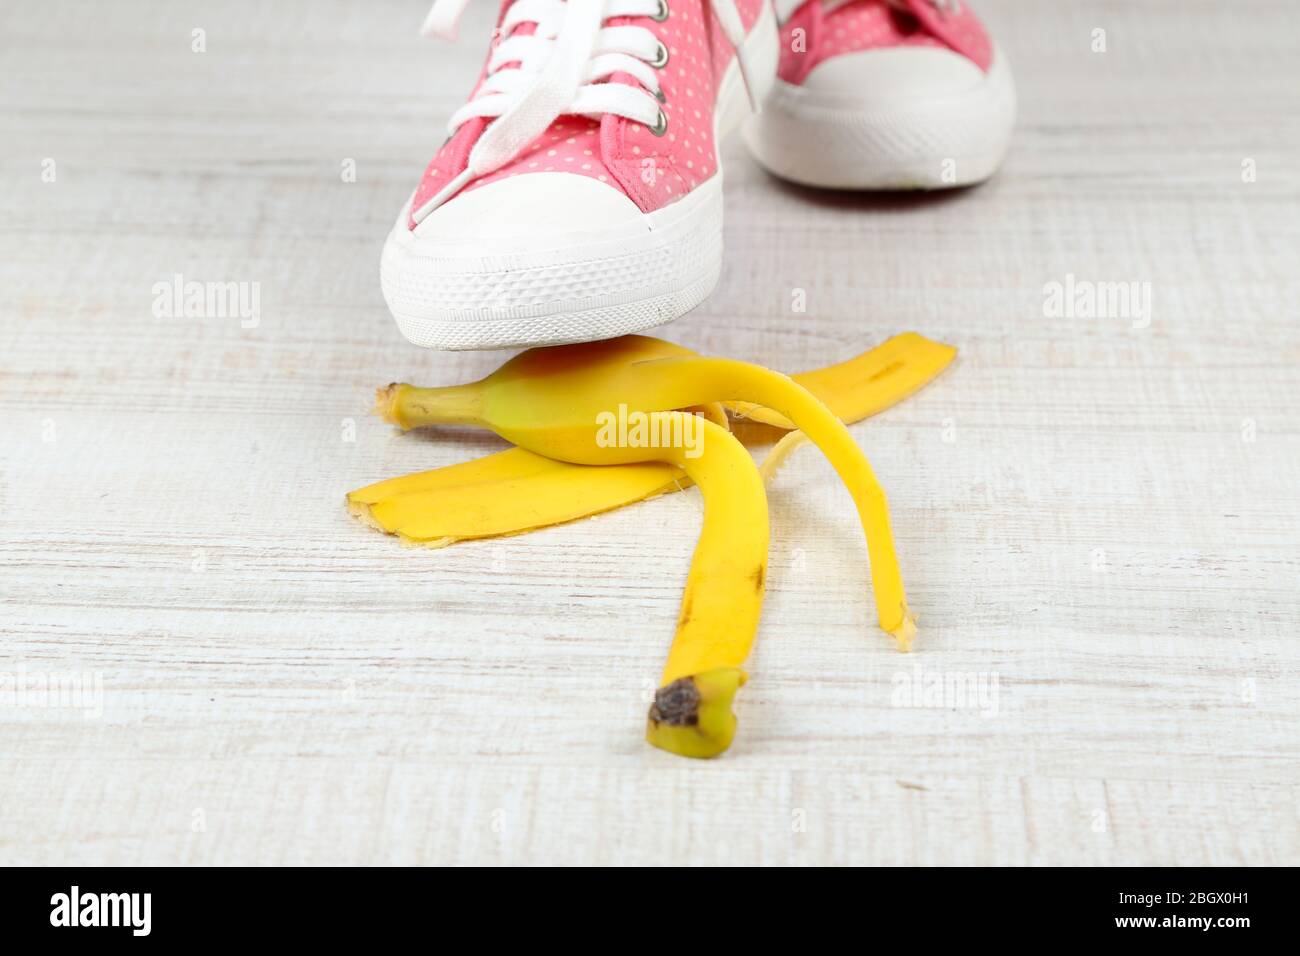 Shoe to slip on banana peel and have an accident Stock Photo - Alamy